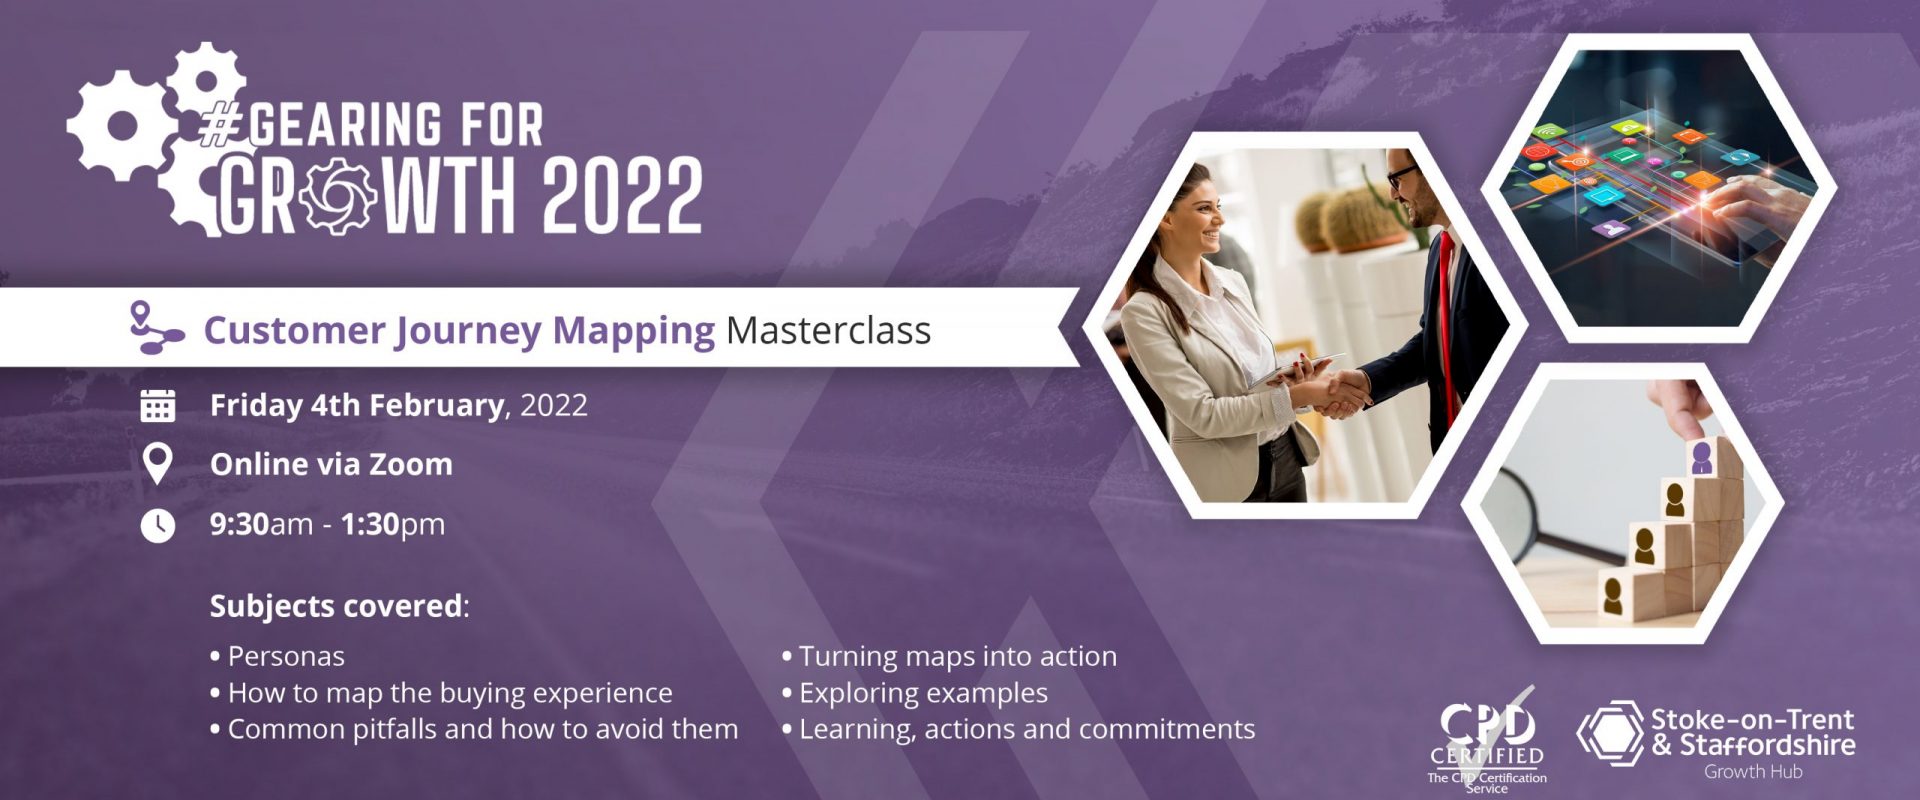 #GEARINGFORGROWTH2022: Customer Journey Mapping Masterclass - CPD Accredited